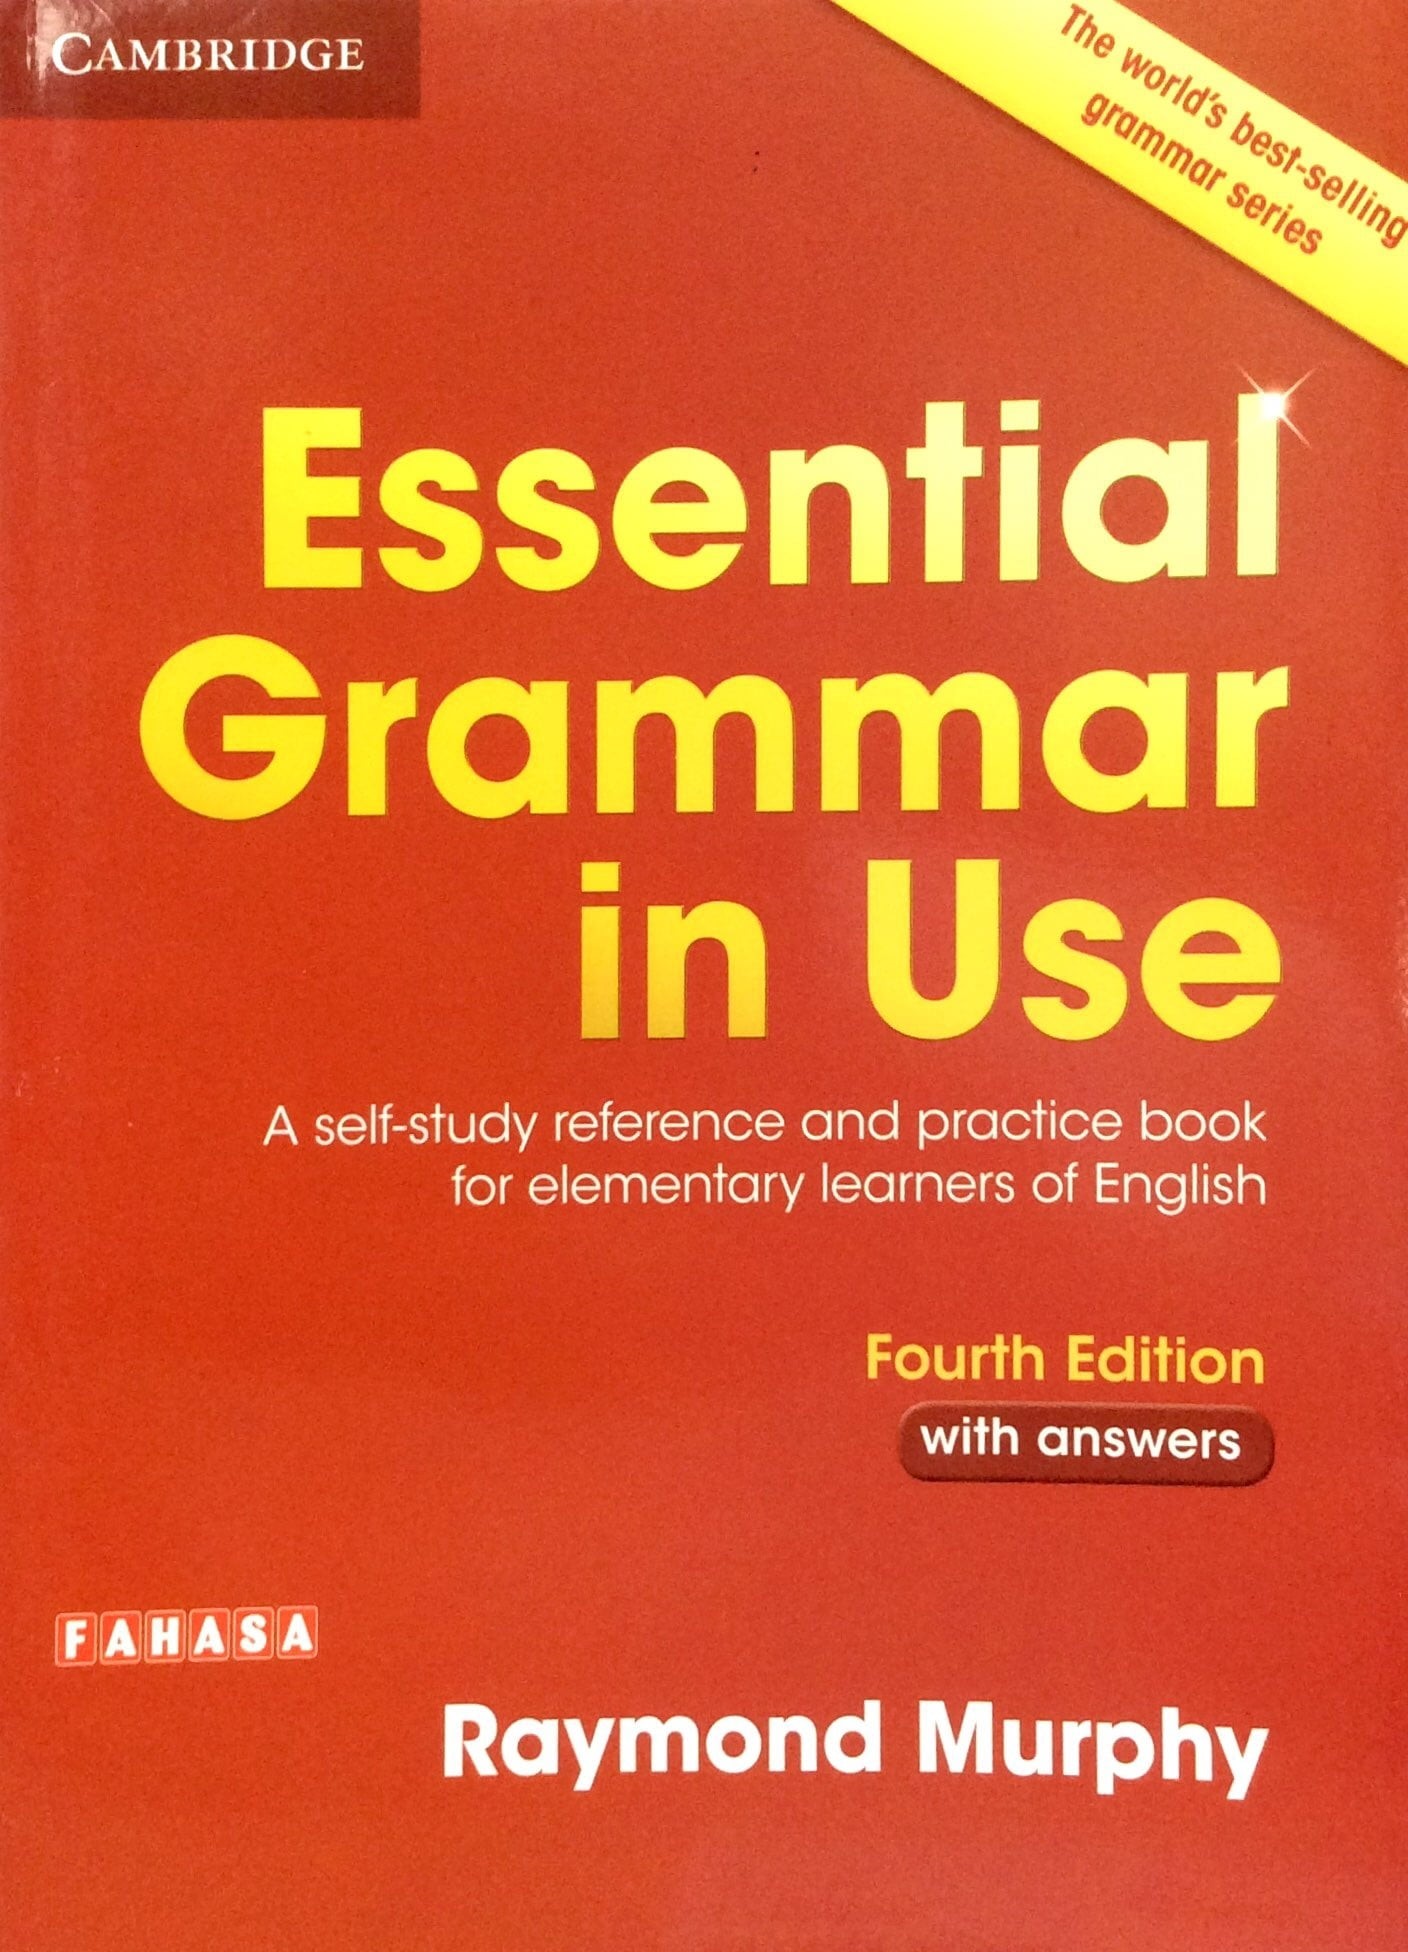 Essential grammar in use#A self-study reference and practice book for elementary students of English with answers